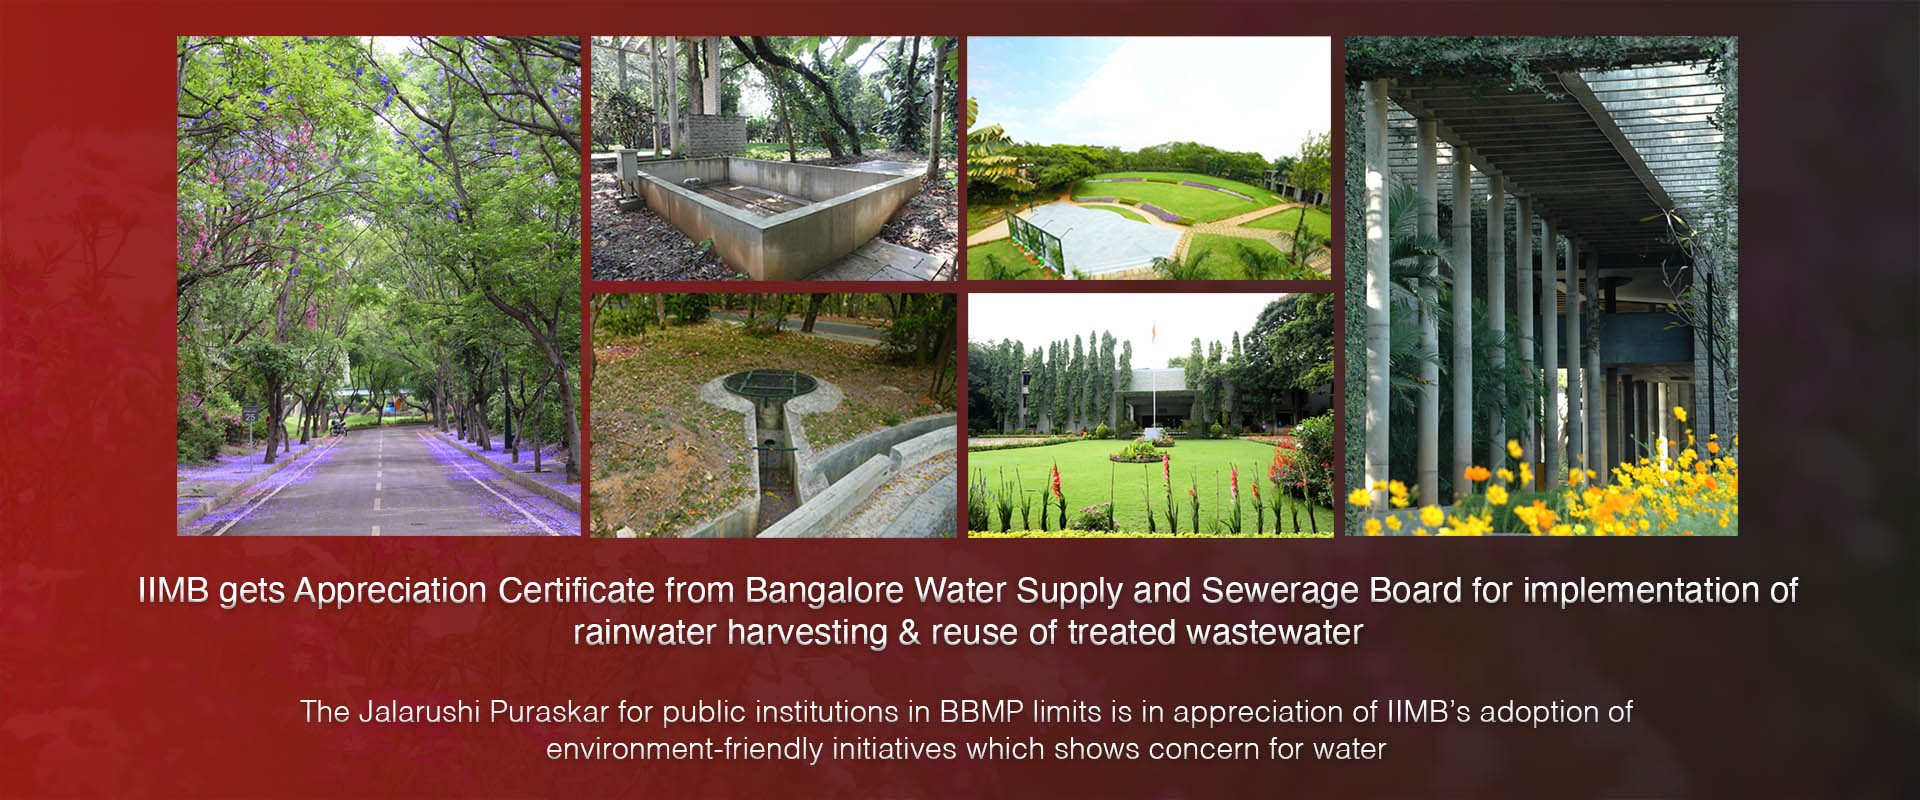 IIMB gets Appreciation Certificate from Bangalore Water Supply and Sewerage Board for implementation of rainwater harvesting & reuse of treated wastewater